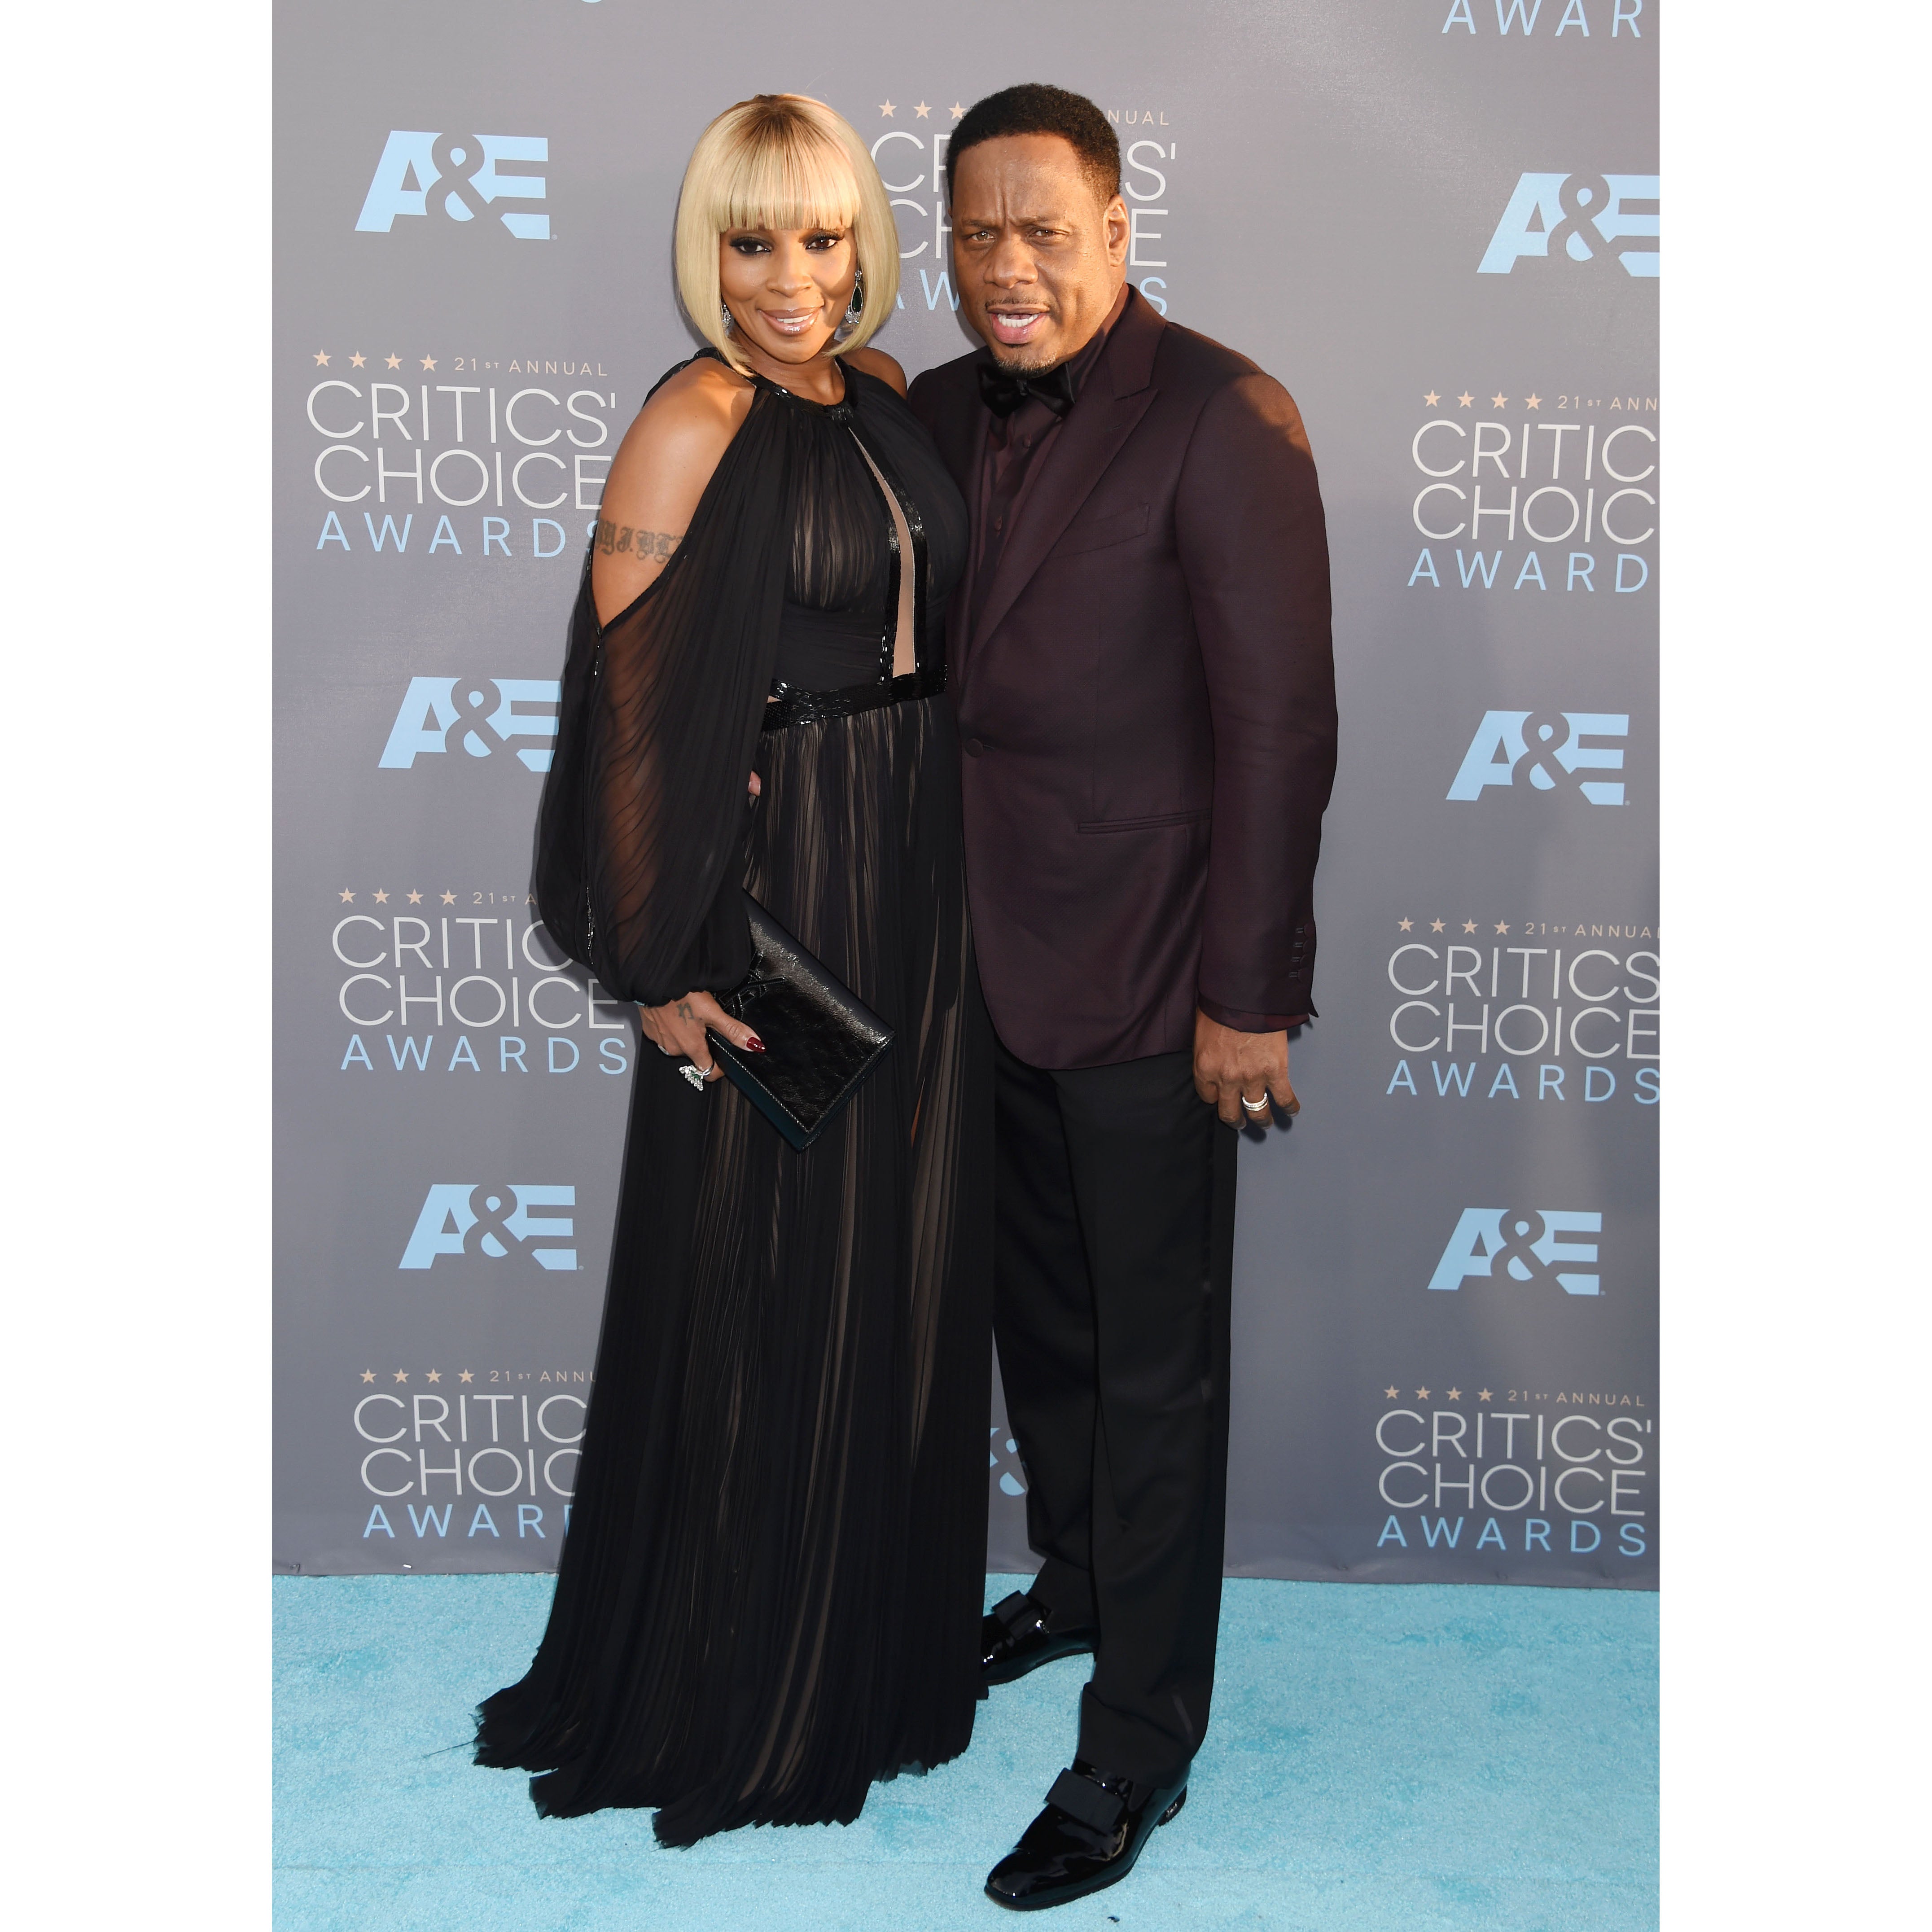 Remembering Happier Times: Mary J. Blige and Kendu Issacs' Love In Pictures
